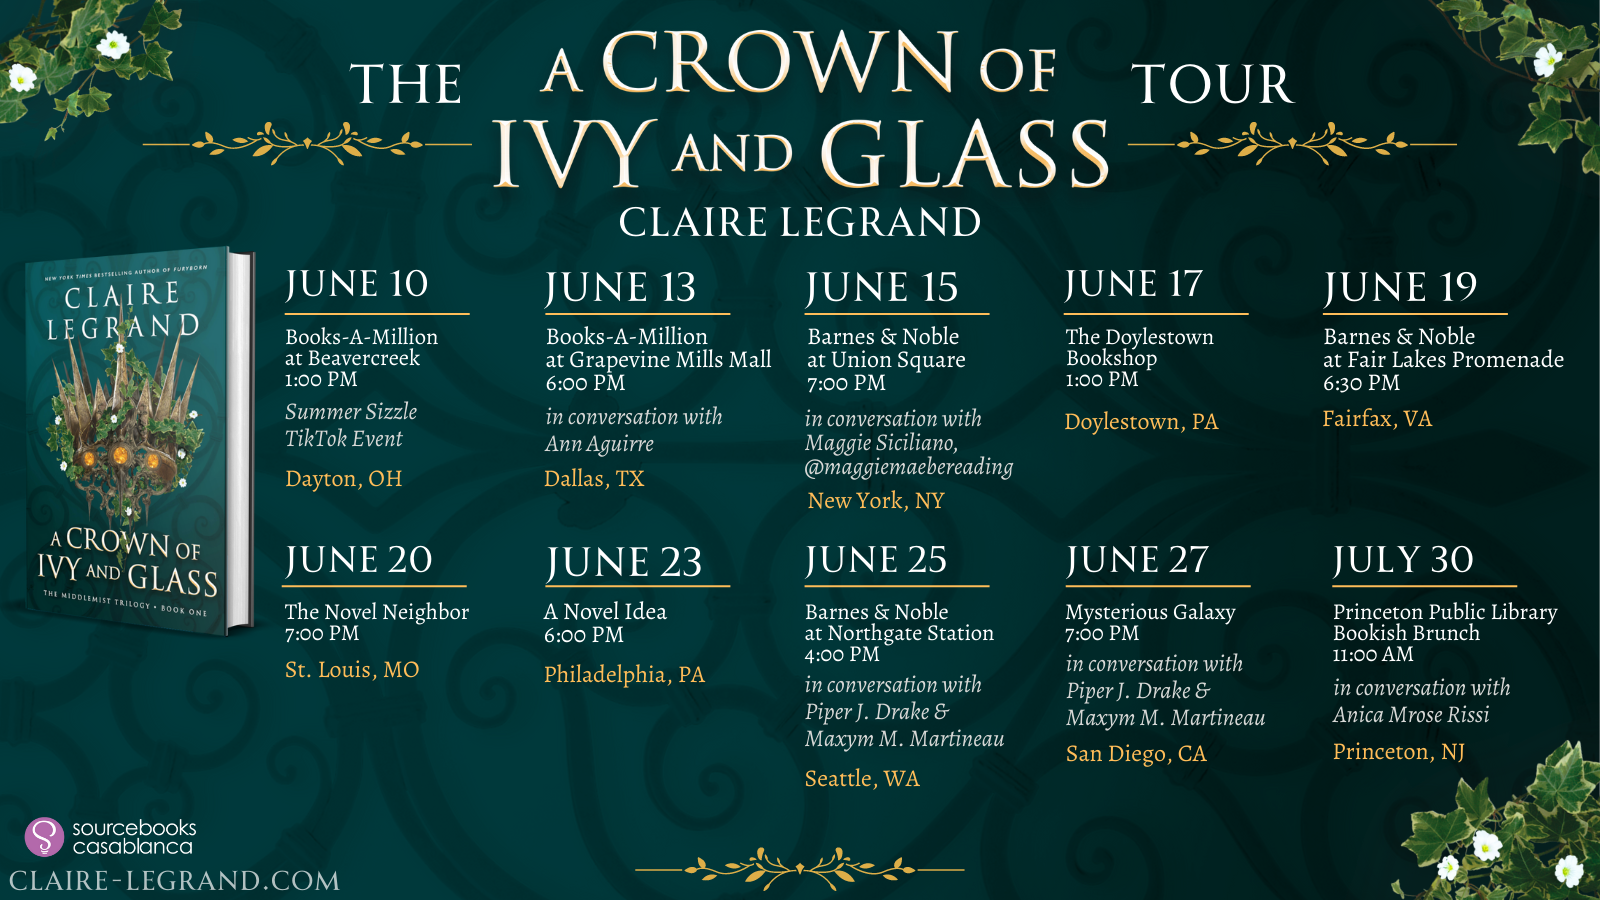 Banner image listing all of the event dates and locations for Claire Legrand's upcoming A CROWN OF IVY AND GLASS tour.